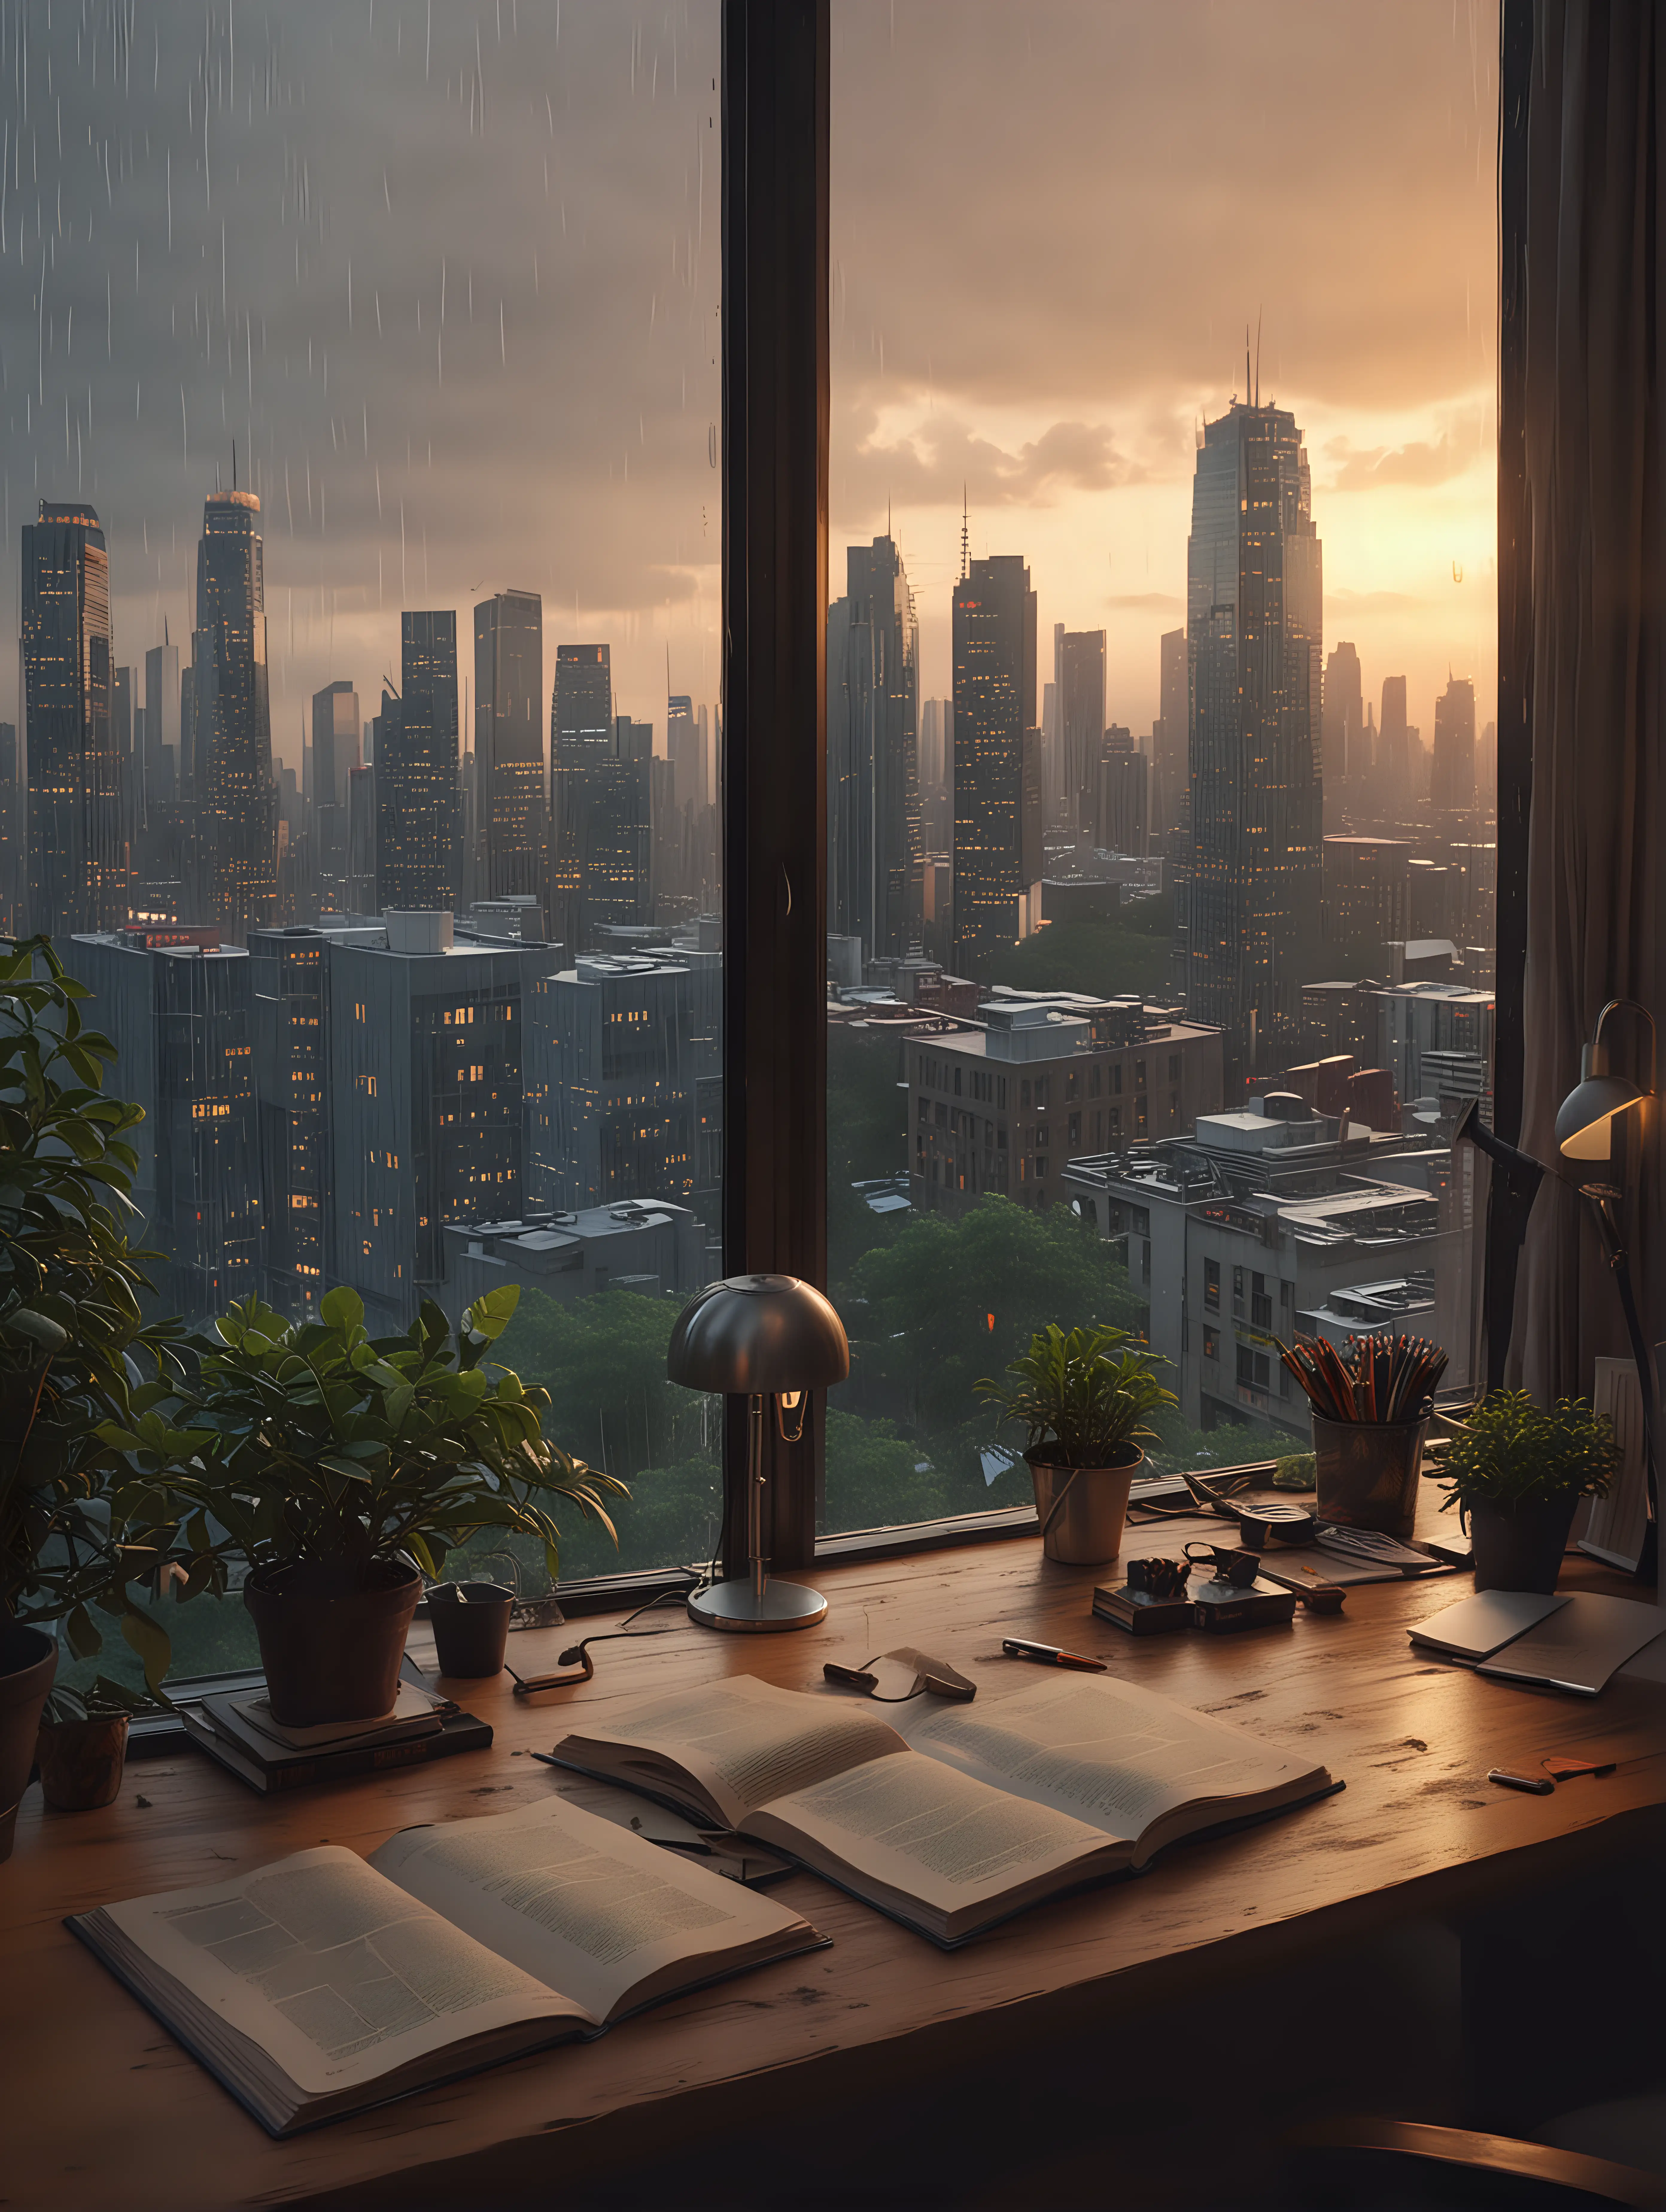 Cozy Study Room with Distant Skyscraper View at Dusk